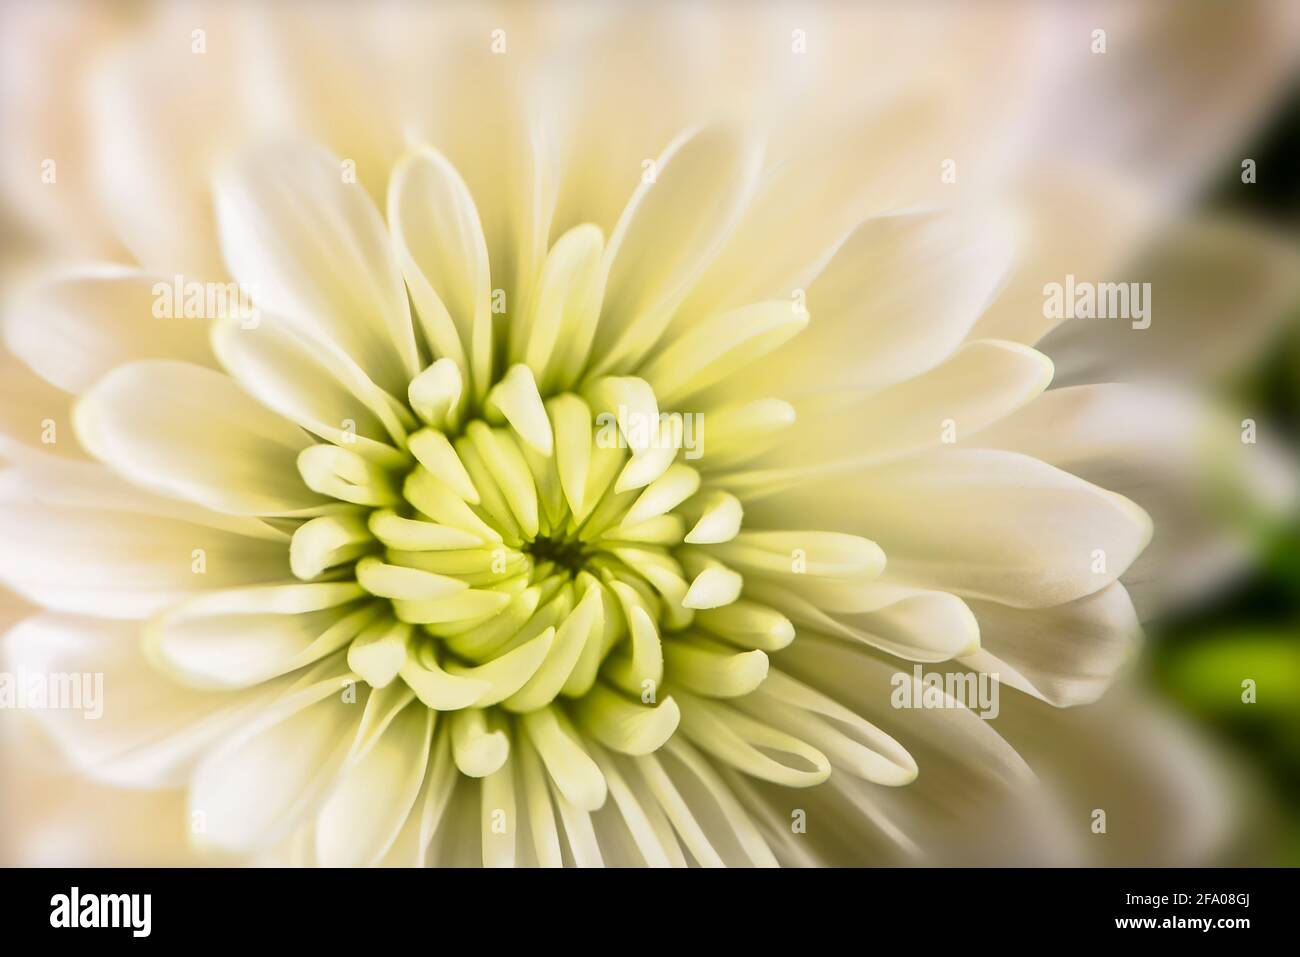 Macro look at a white blooming Chrysanthemum flower with a soft focus for background Stock Photo